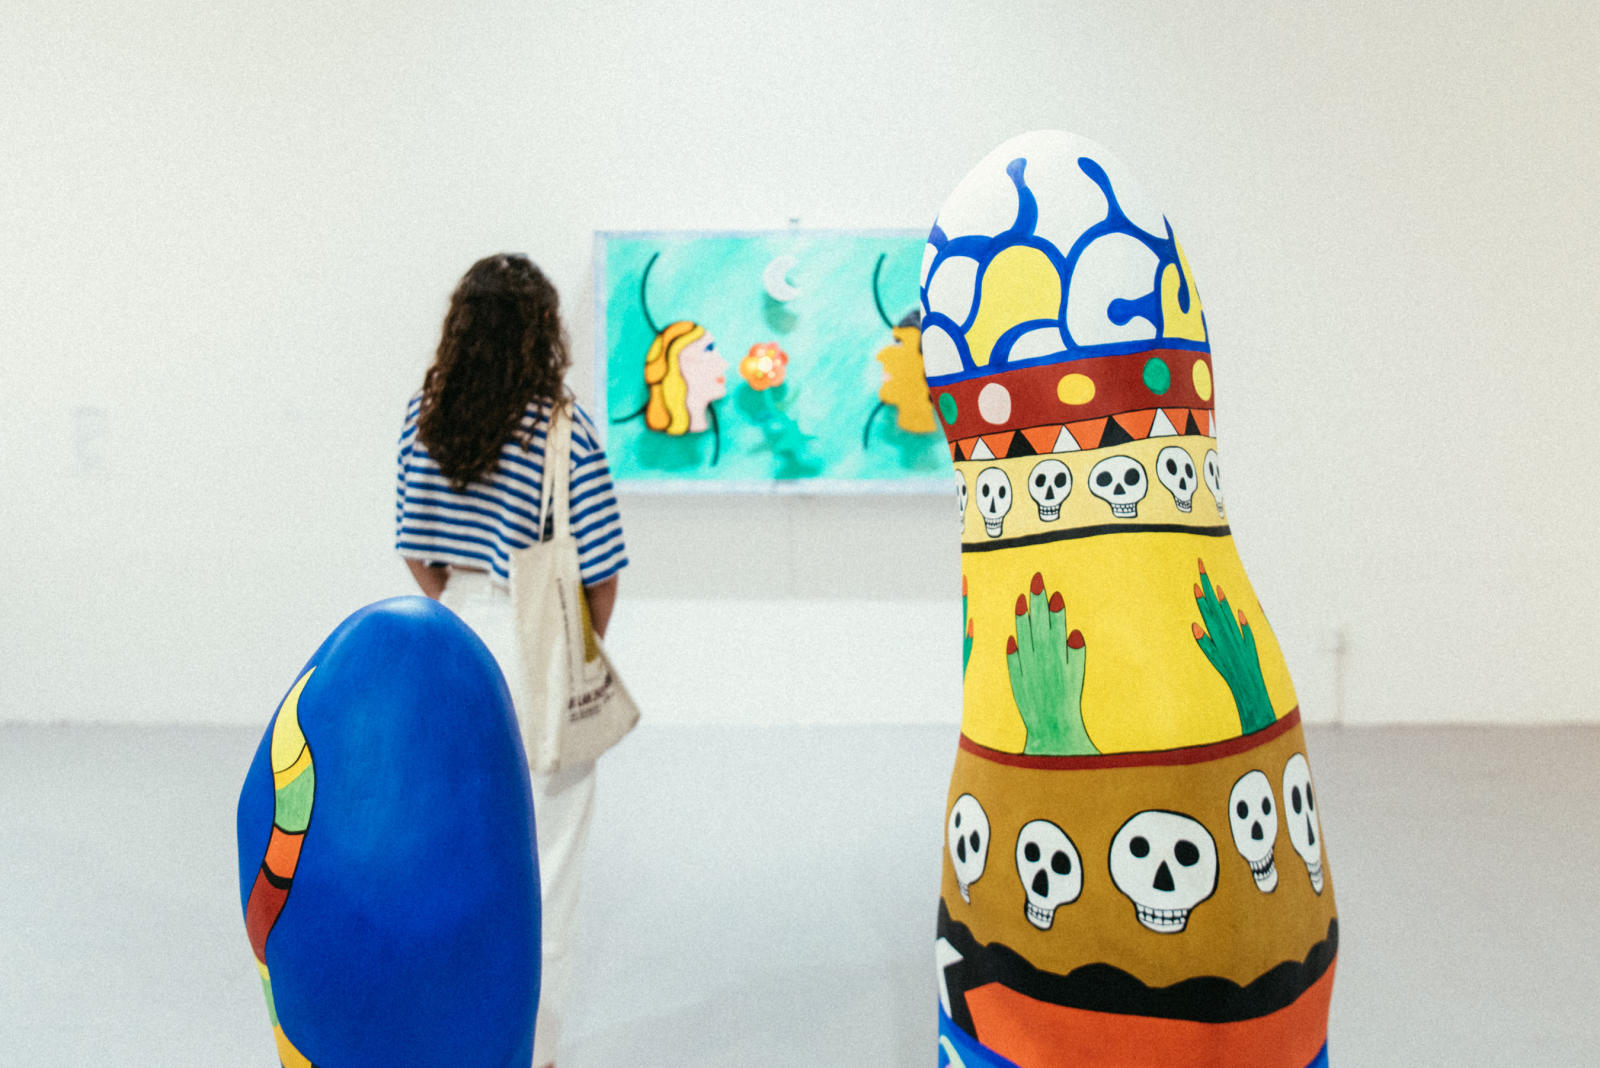 The sculpture and painting of Niki de Saint Phalle